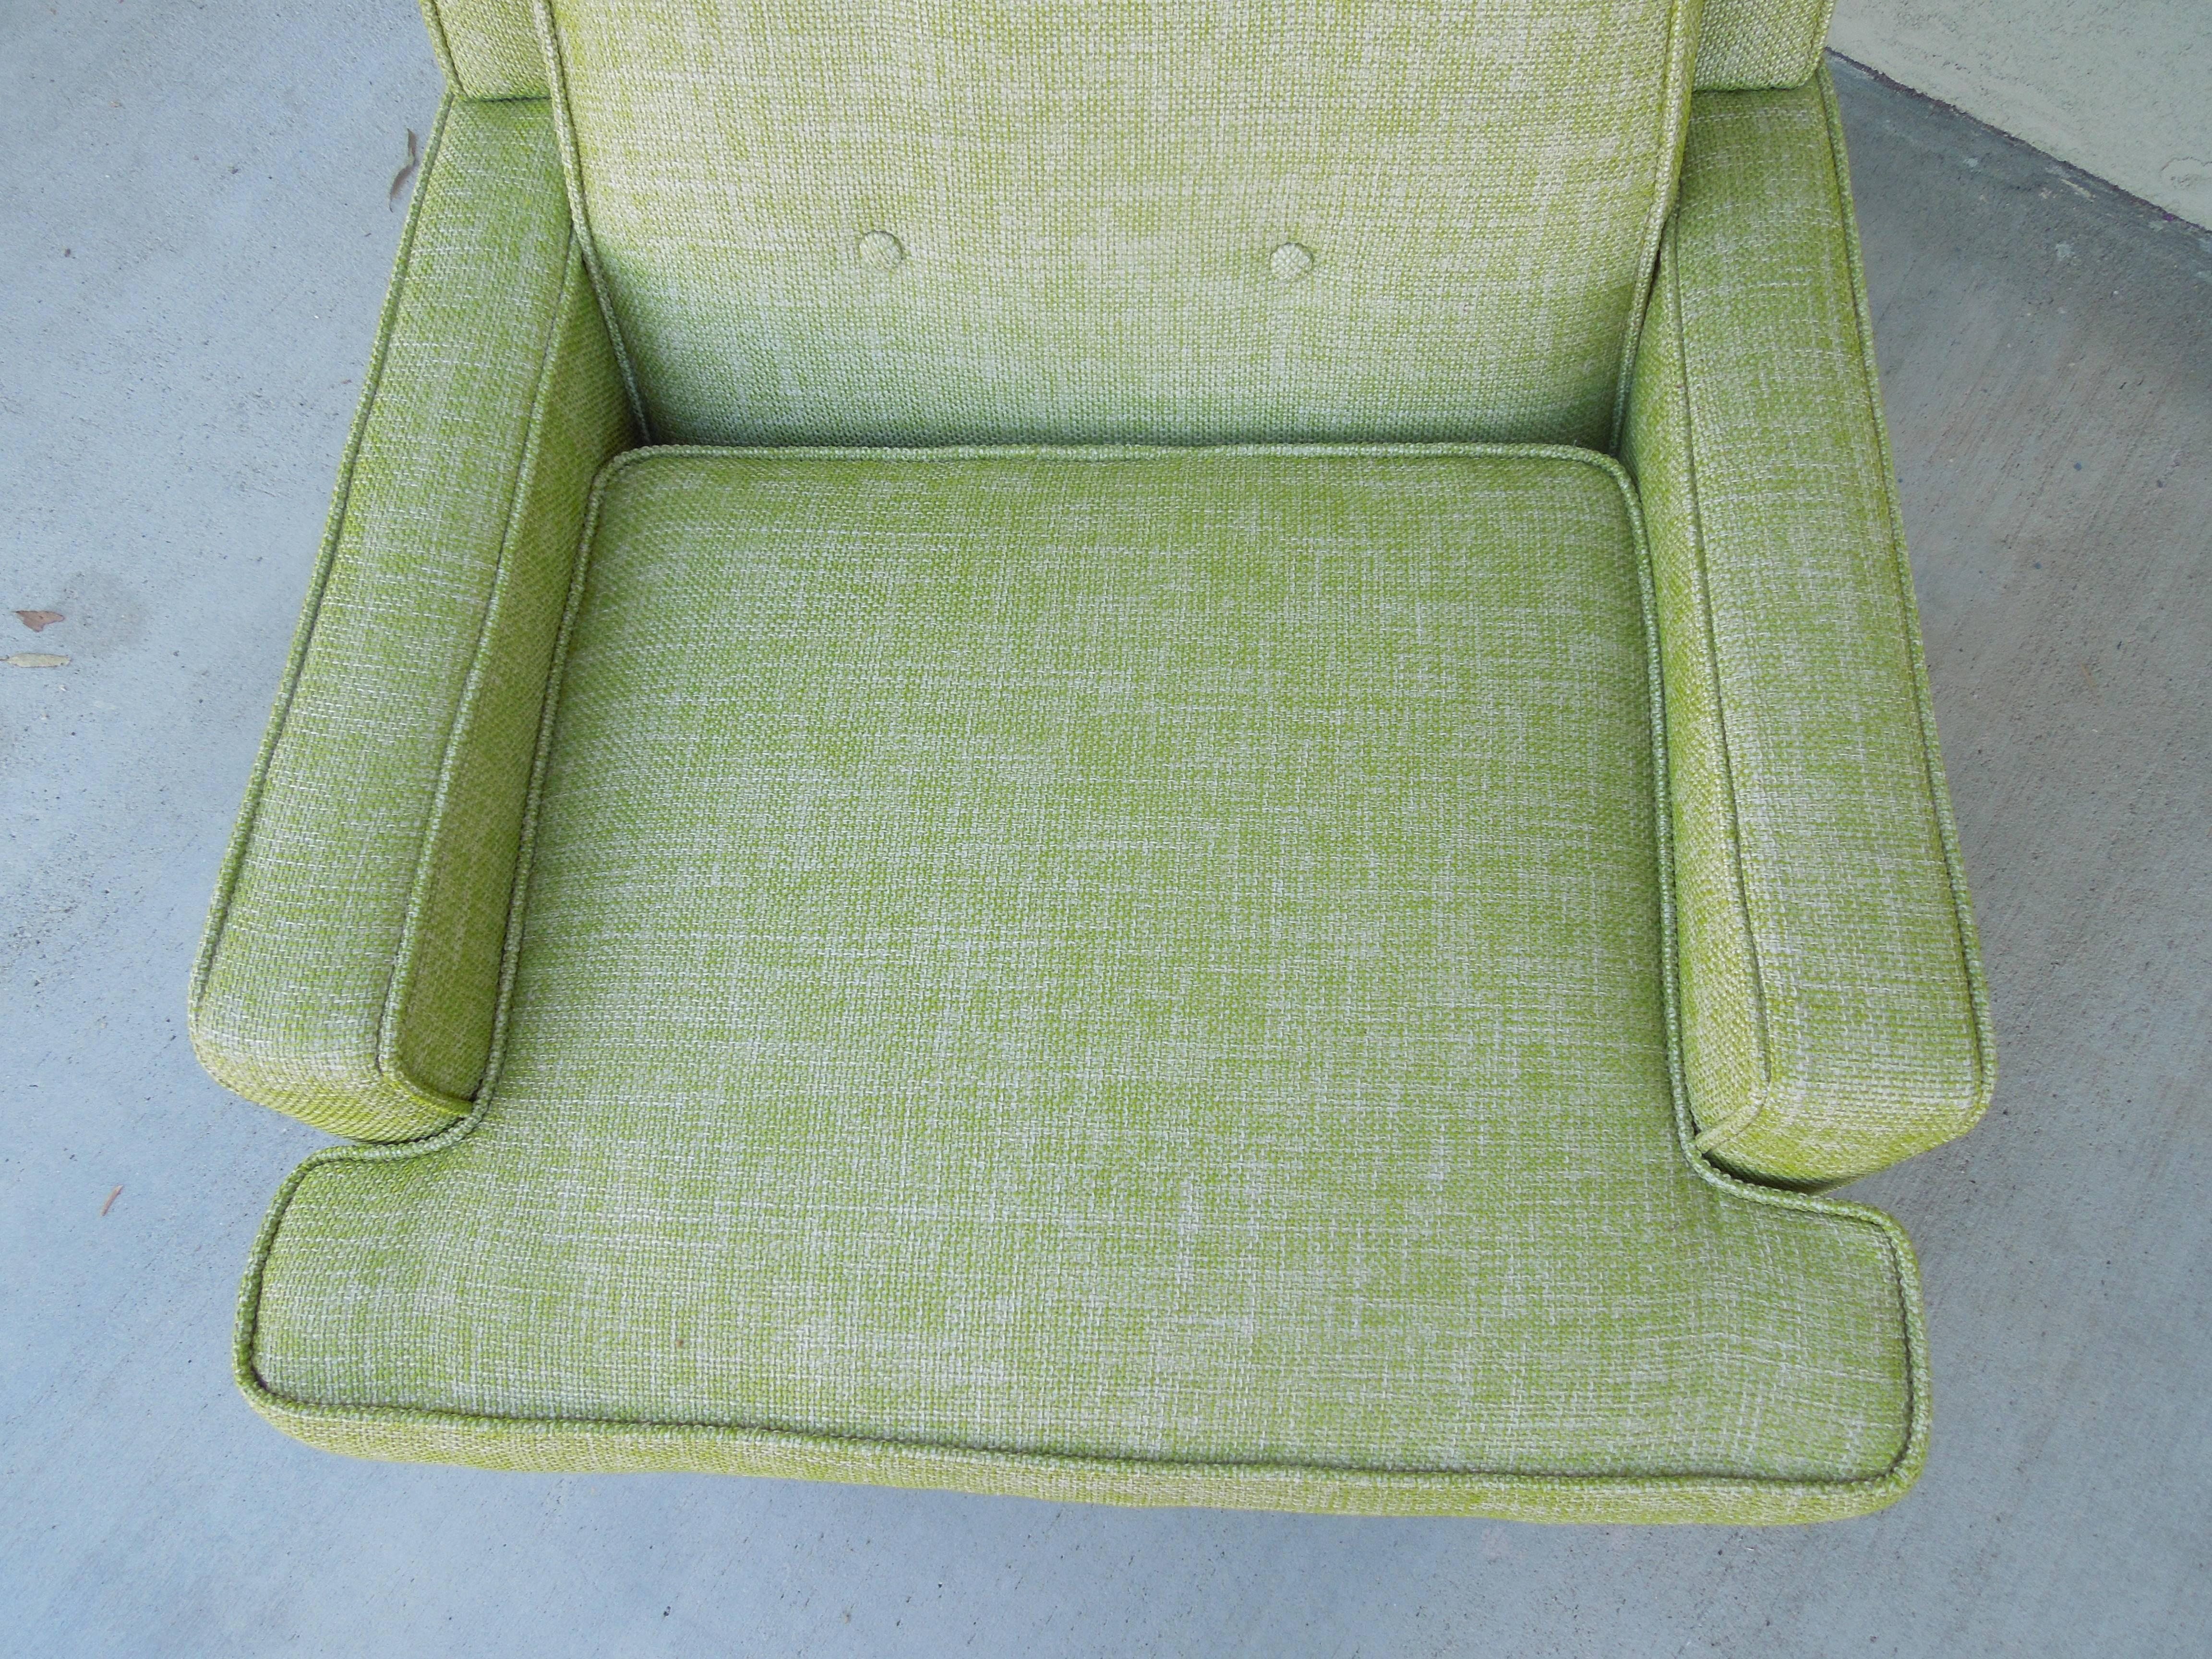 This chair in the wormley/Dunbar style has been newly upholstered in very high end lime tweed from Baker. Expertly reupholstered with self buttons and tailored piping. This is one of the best shape 1960s armchairs I have ever seen. Original walnut